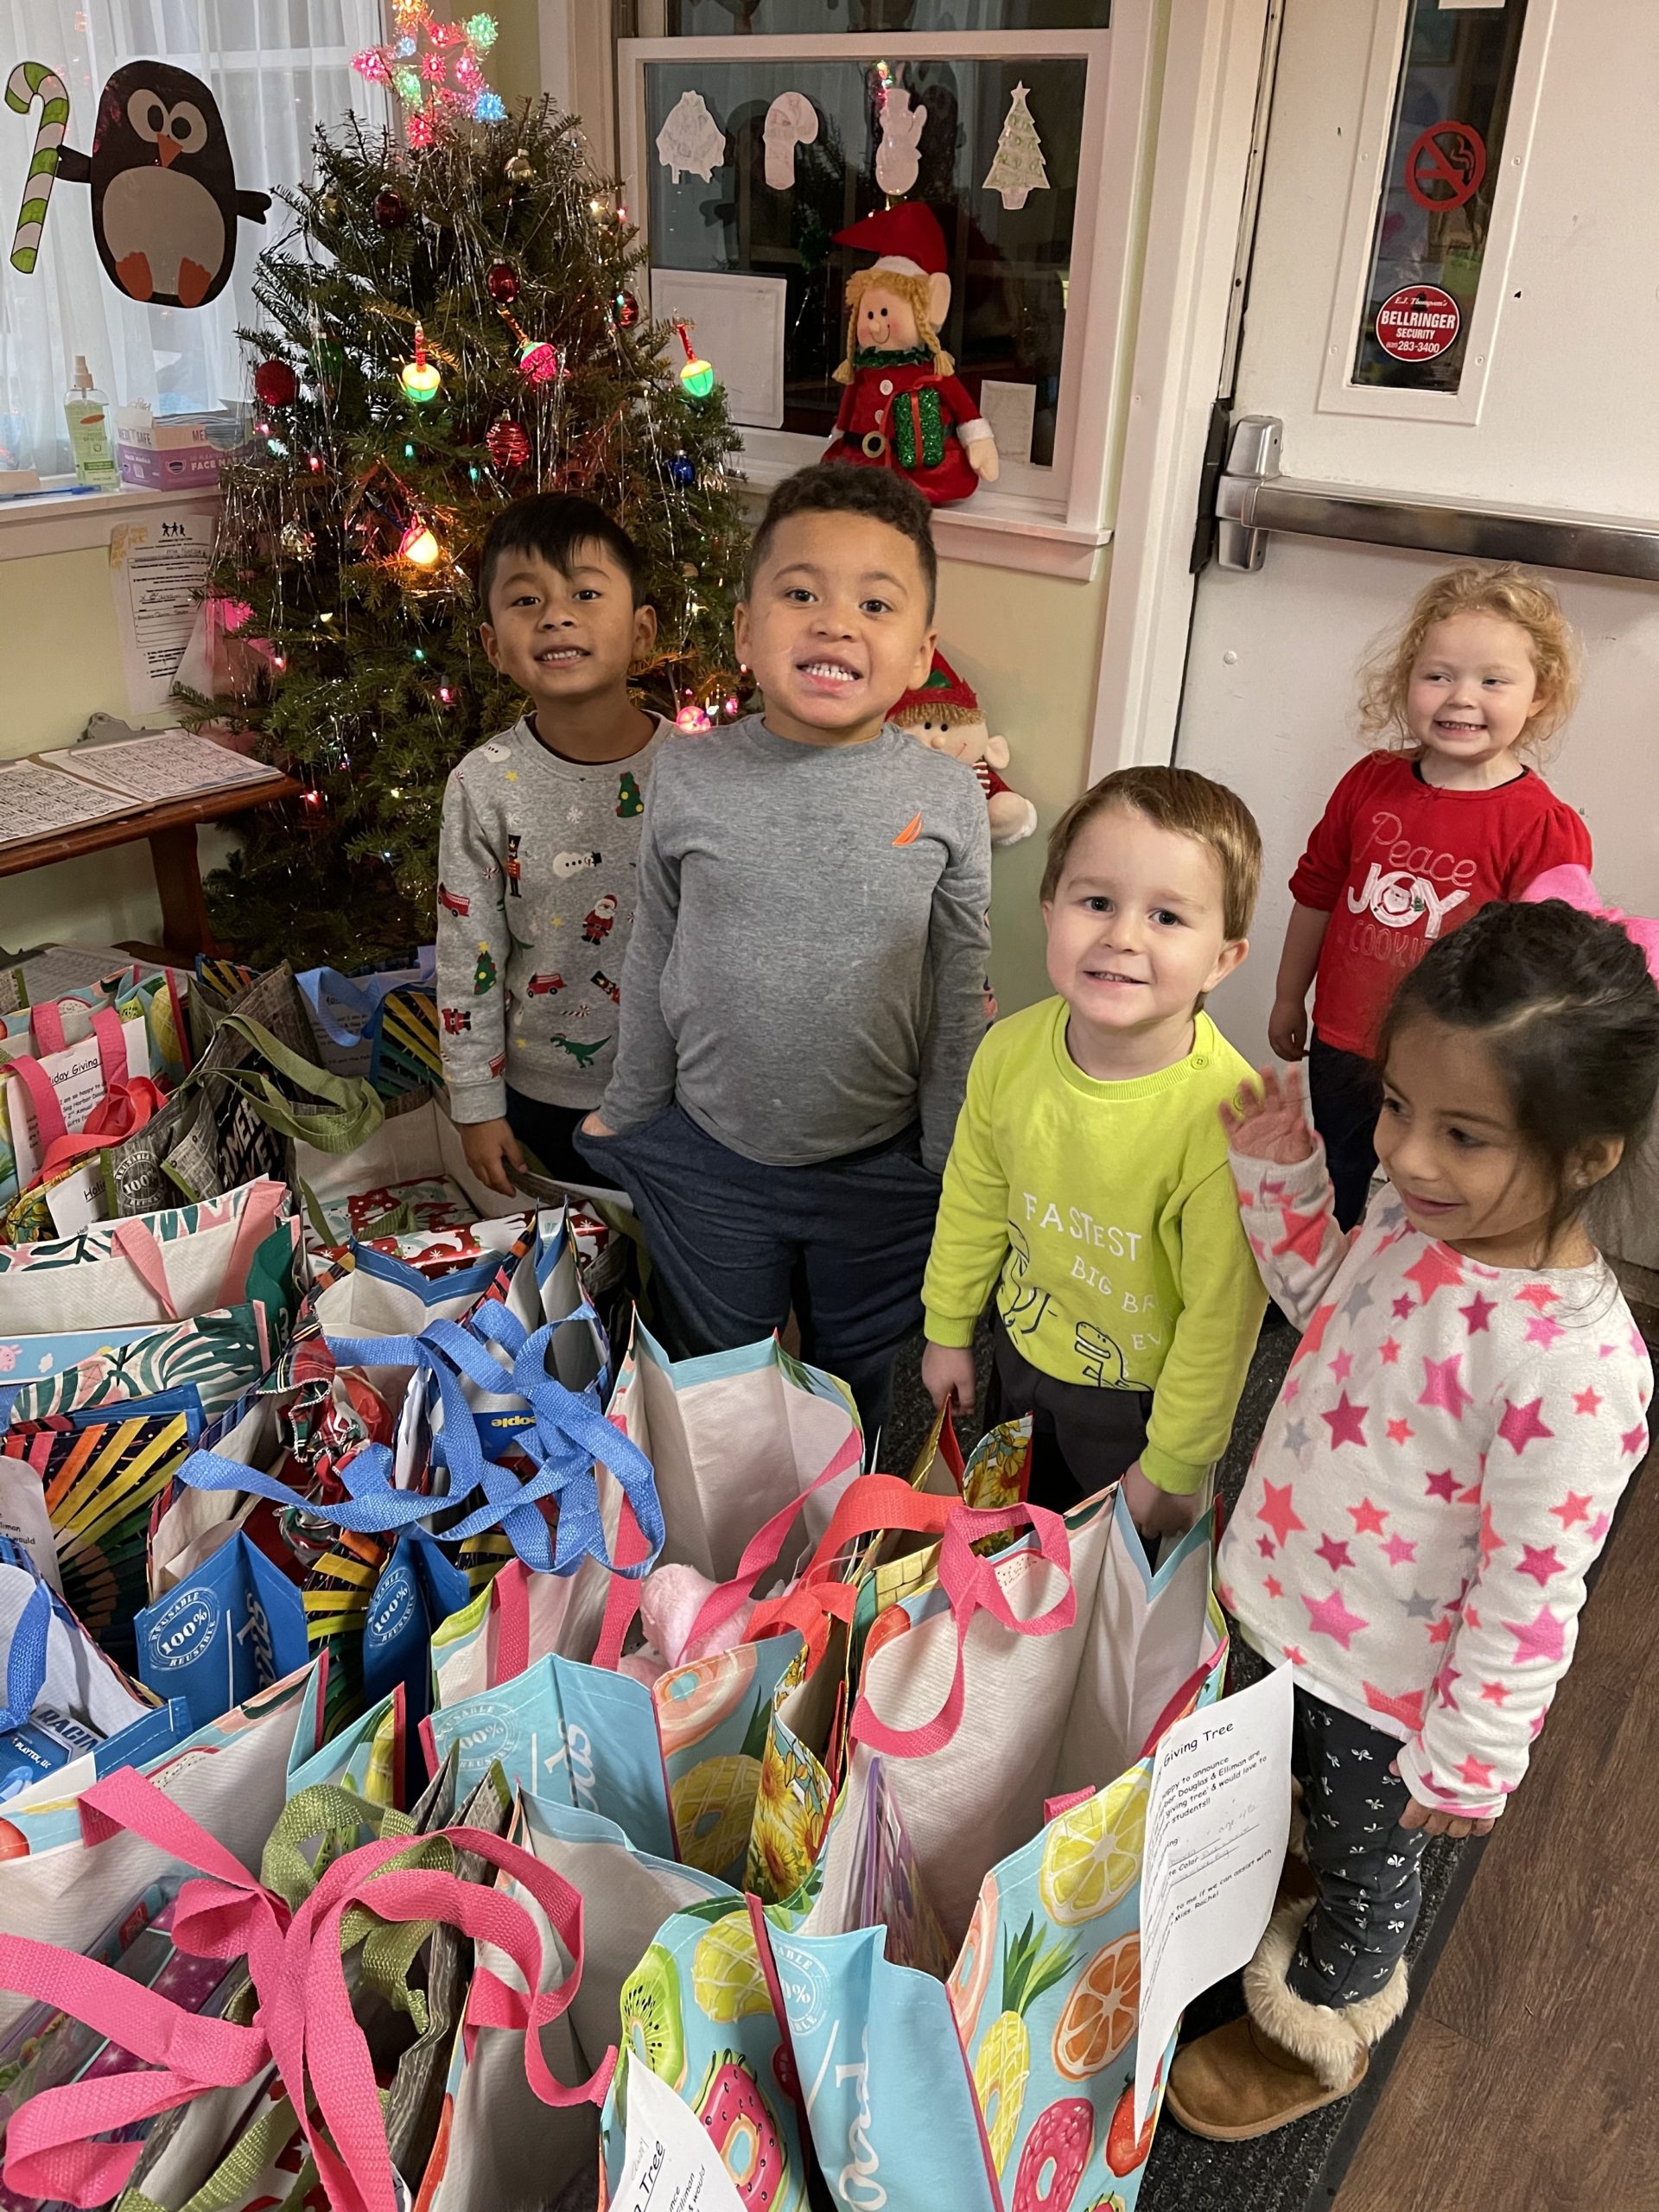 Children at the Southampton Day Care, a nonprofit day care center, receive gifts from a gift giving campaign organized by Brianna Ottati, a real estate agent at Douglas Elliman.